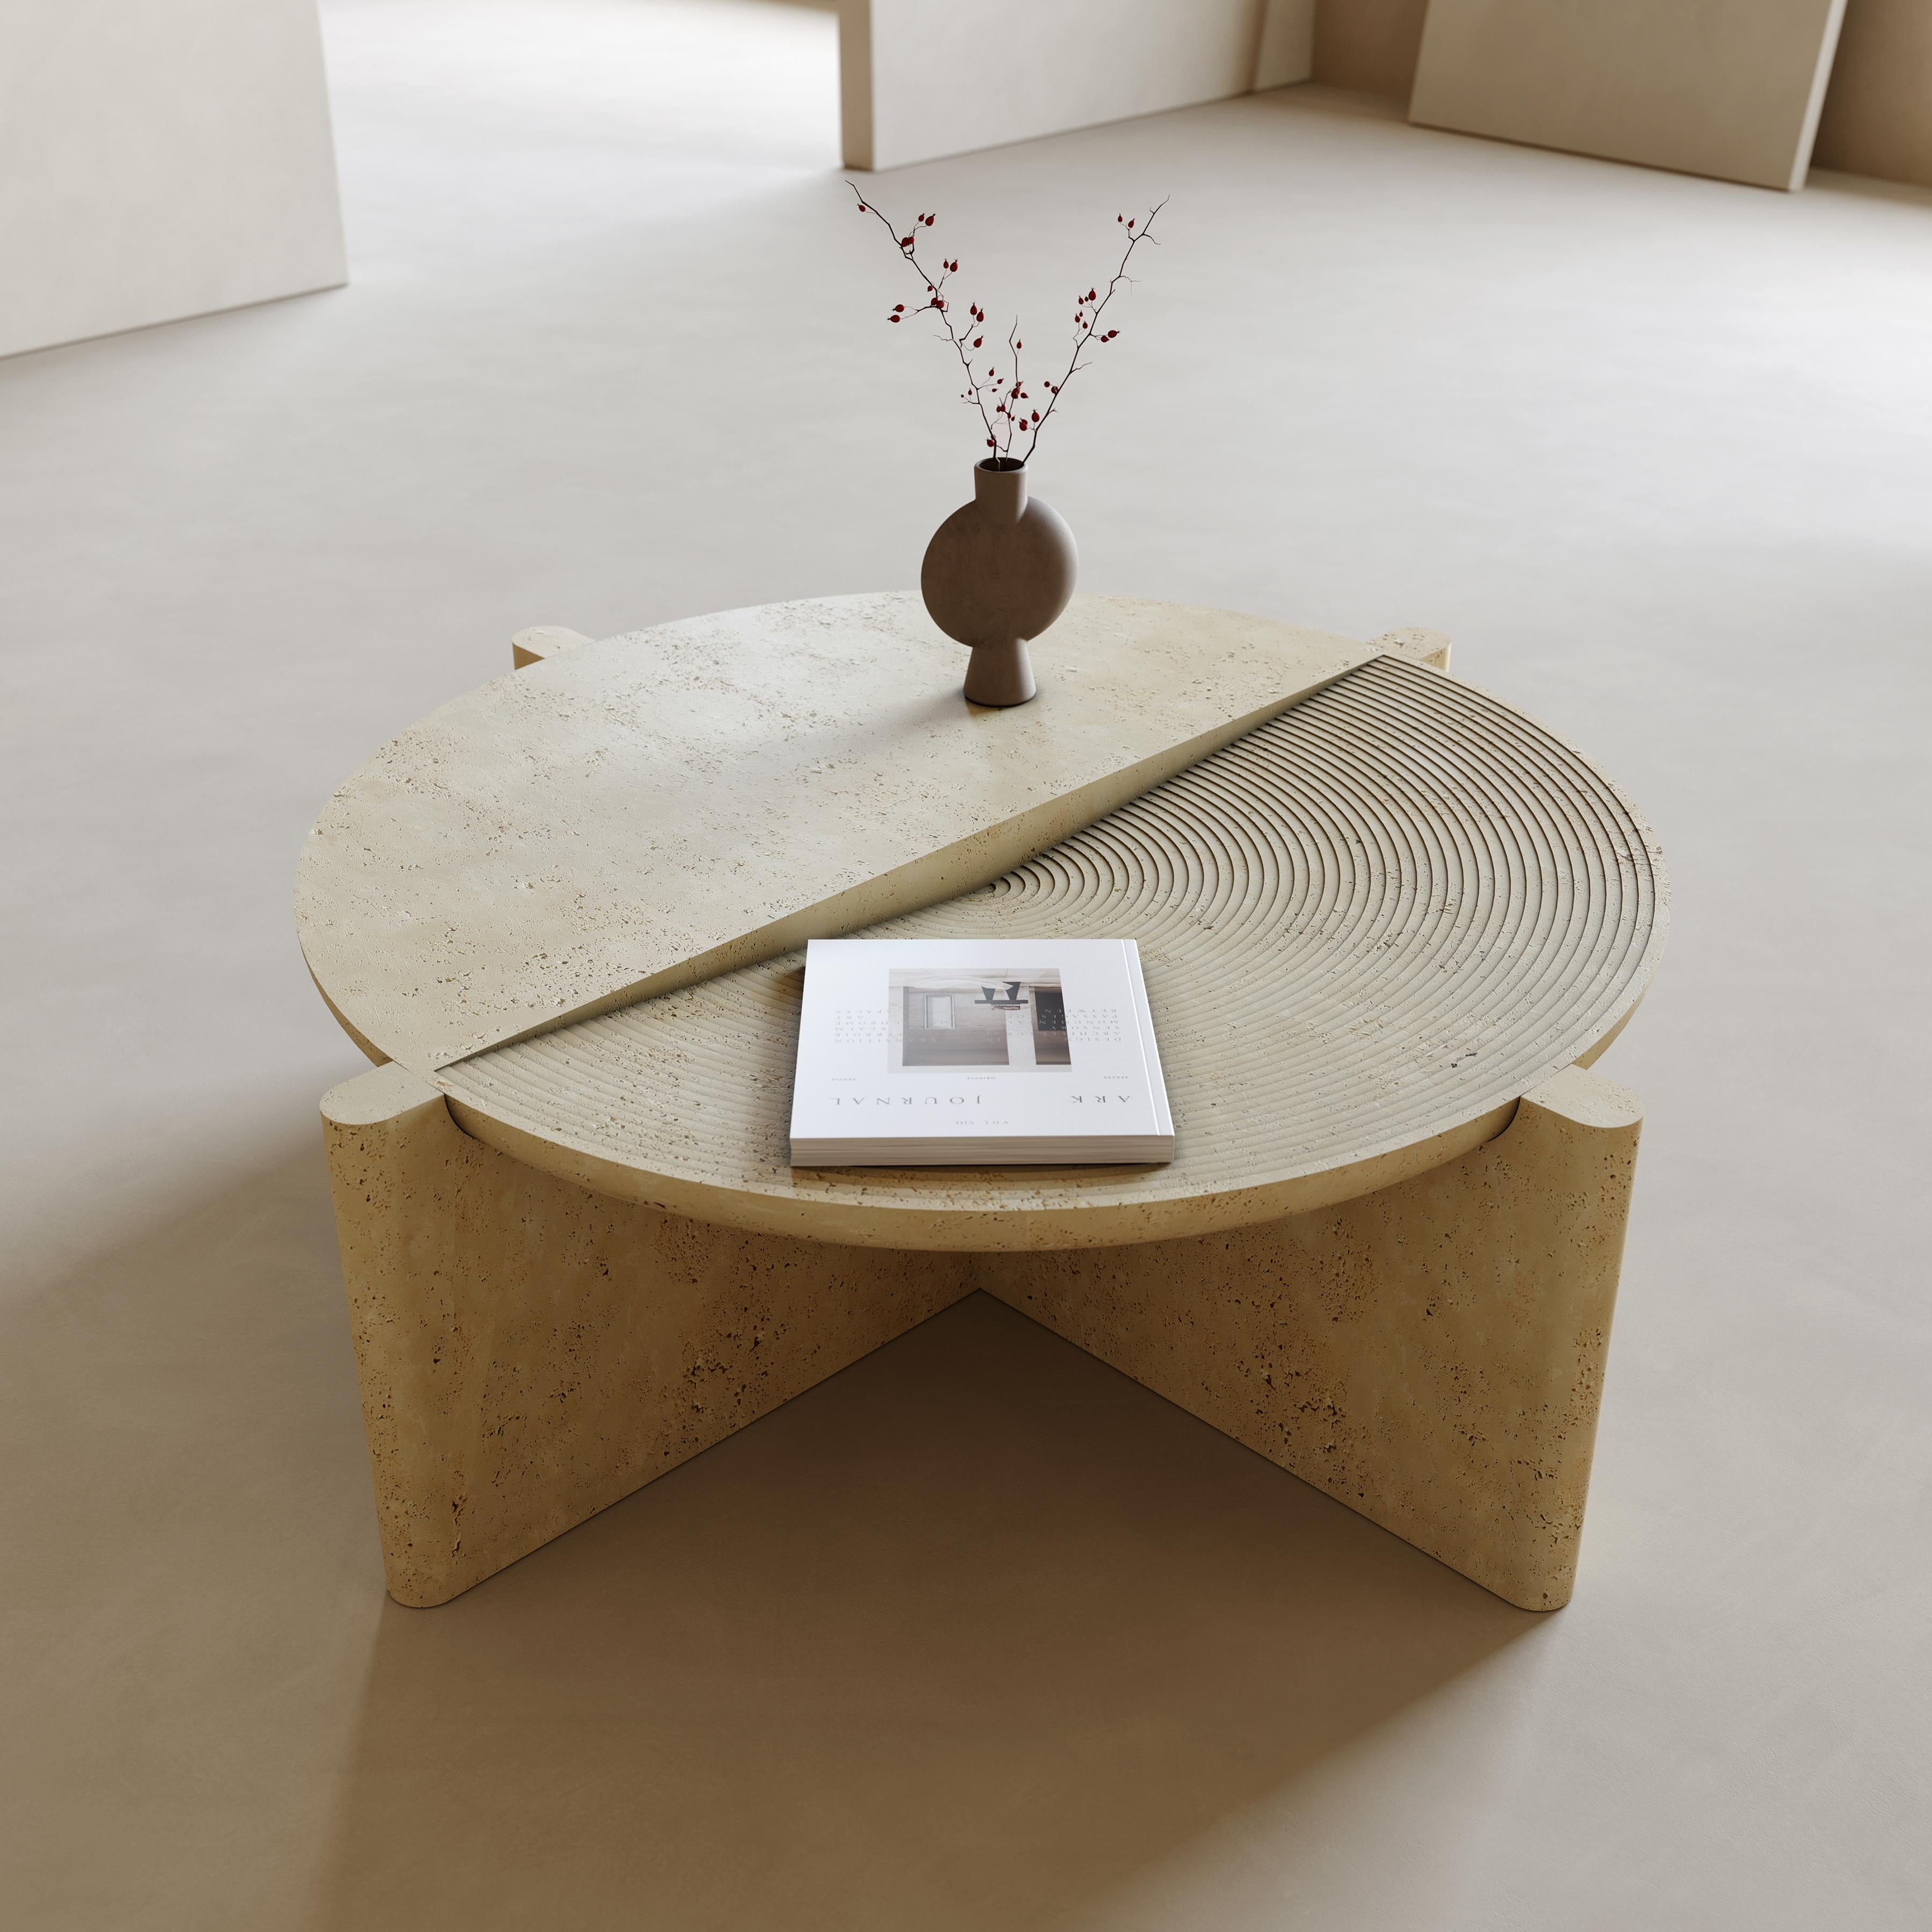 Stone Arkhe No 1 Coffee Table Travertine, Modern Sculptural Round by Fulden Topaloglu For Sale